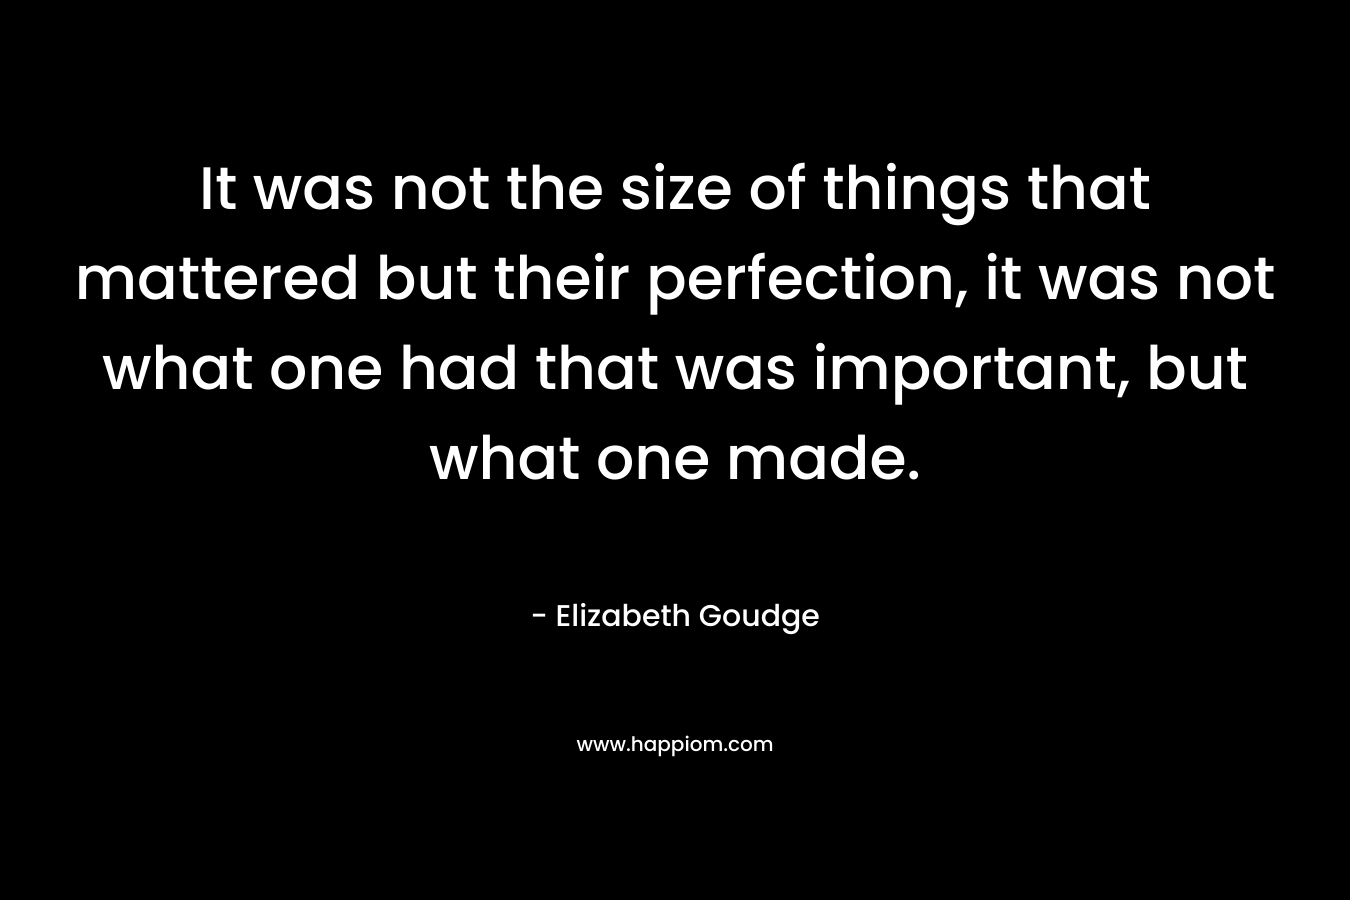 It was not the size of things that mattered but their perfection, it was not what one had that was important, but what one made. – Elizabeth Goudge